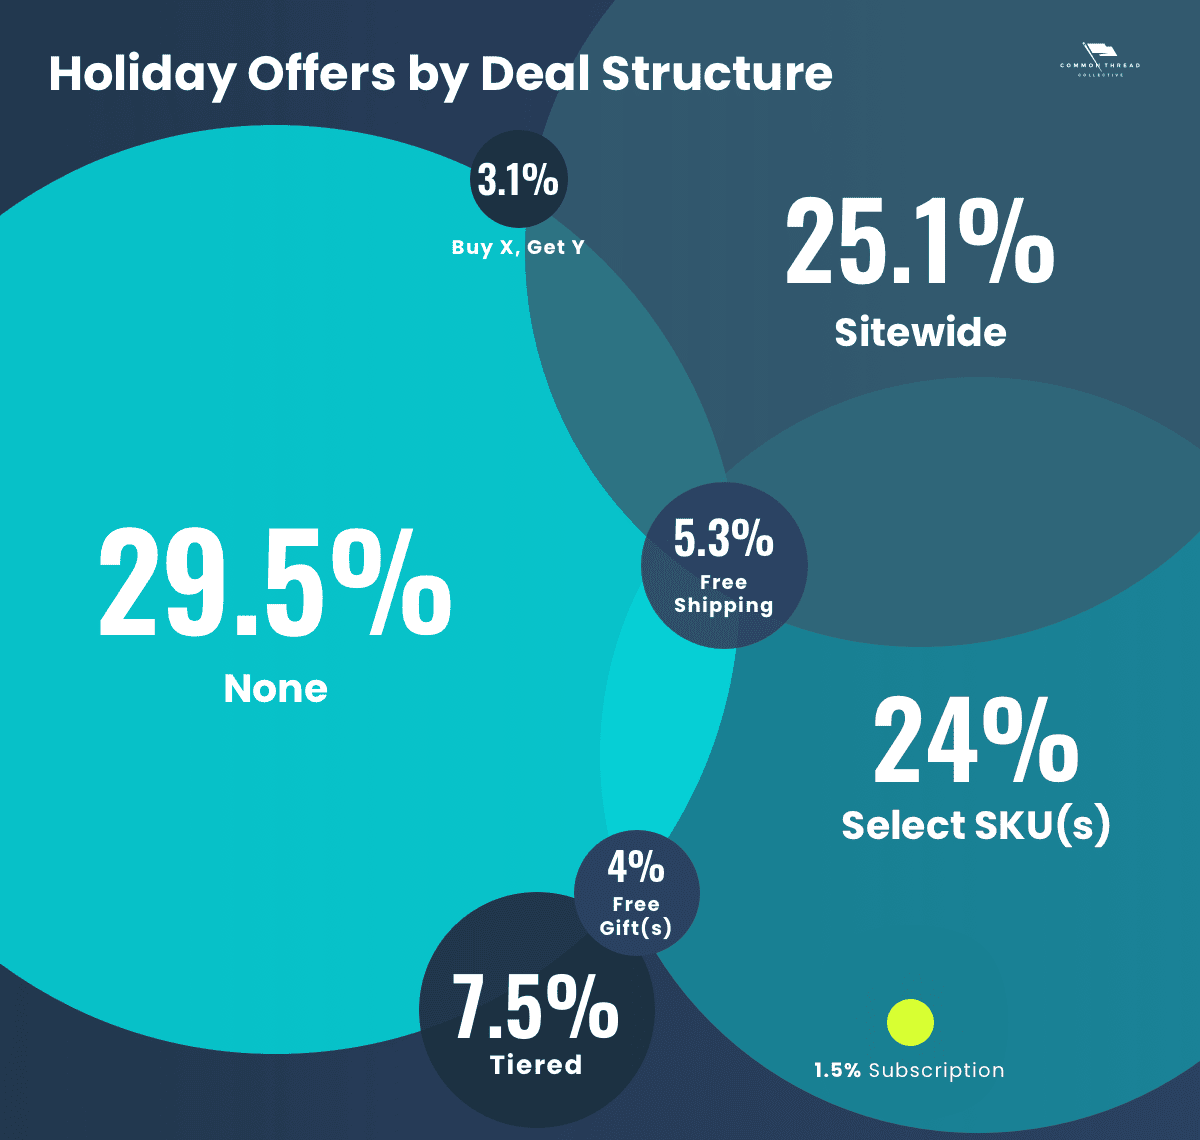 DTC Holiday Offers by Discount and Deal Structure